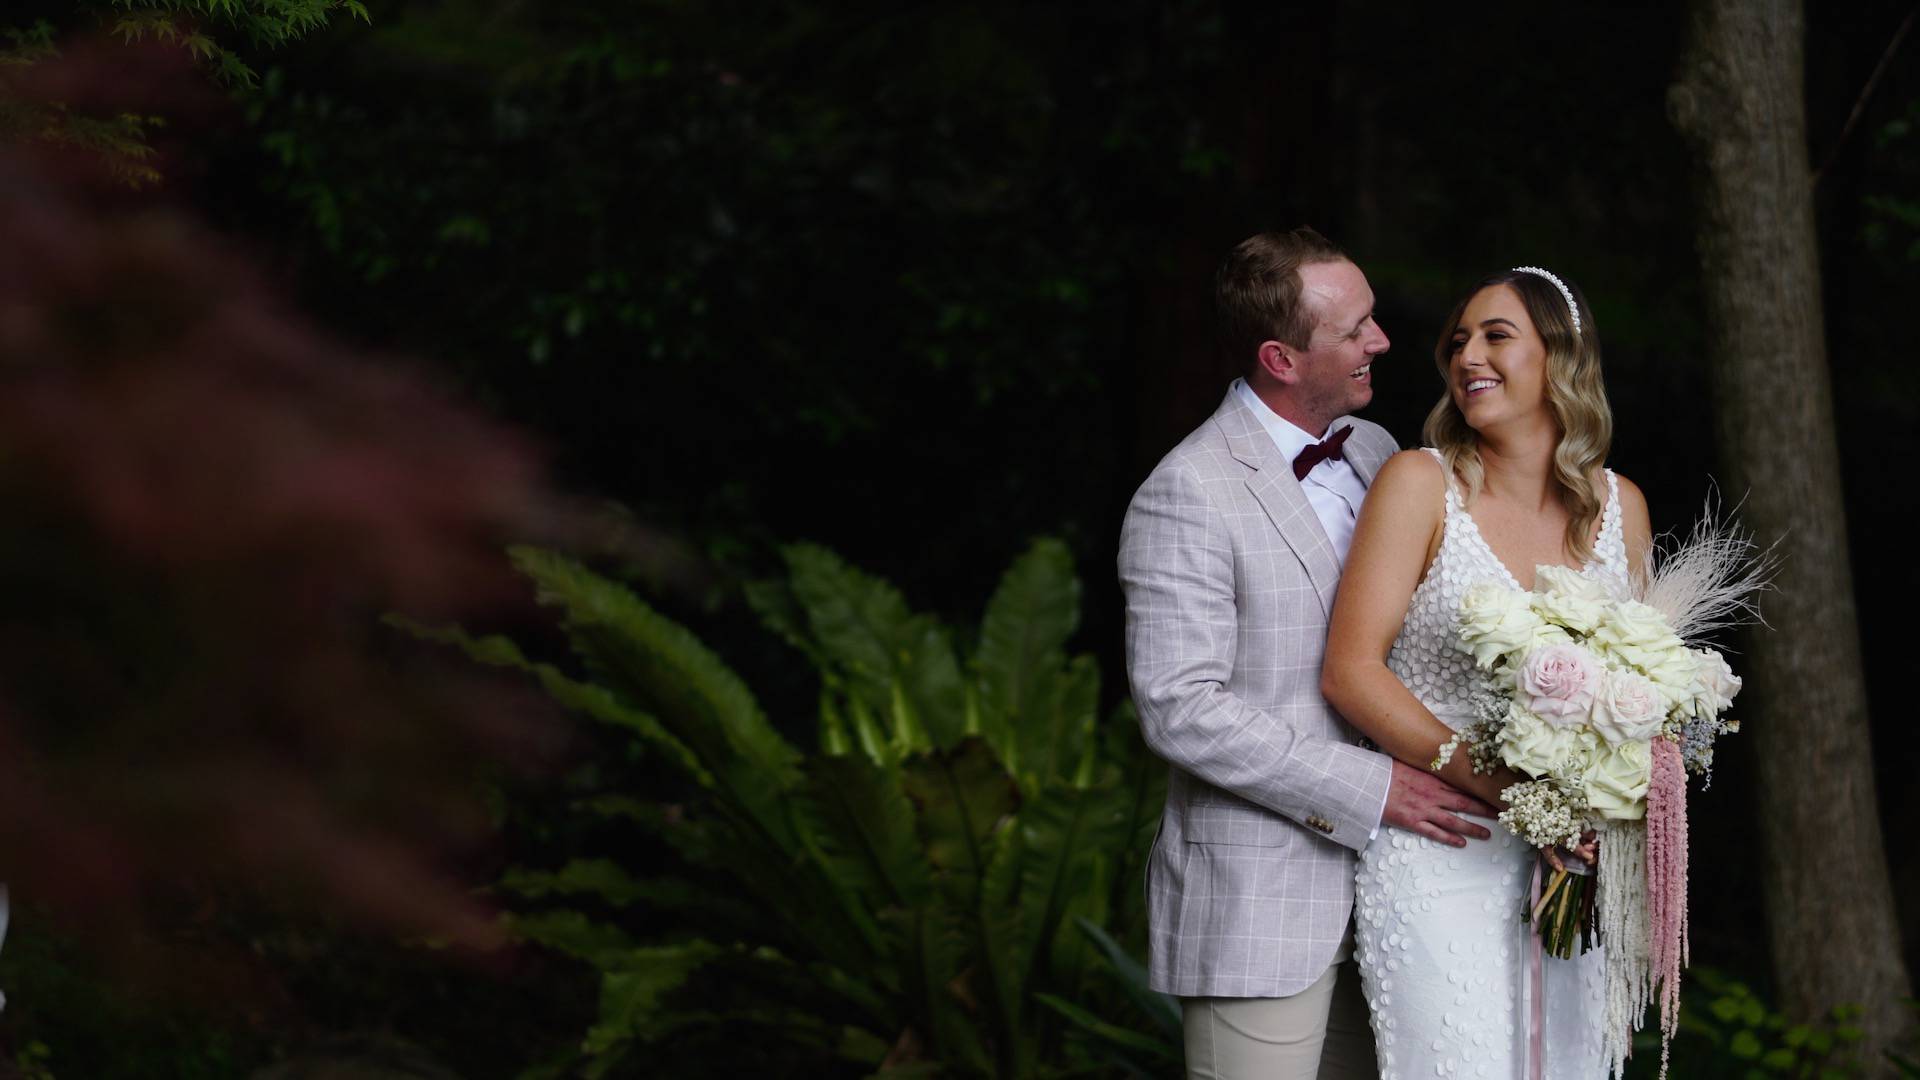 Newly married couple posing among the trees - wedding videography services throughout Wollongong and South Coast NSW - Lovereel